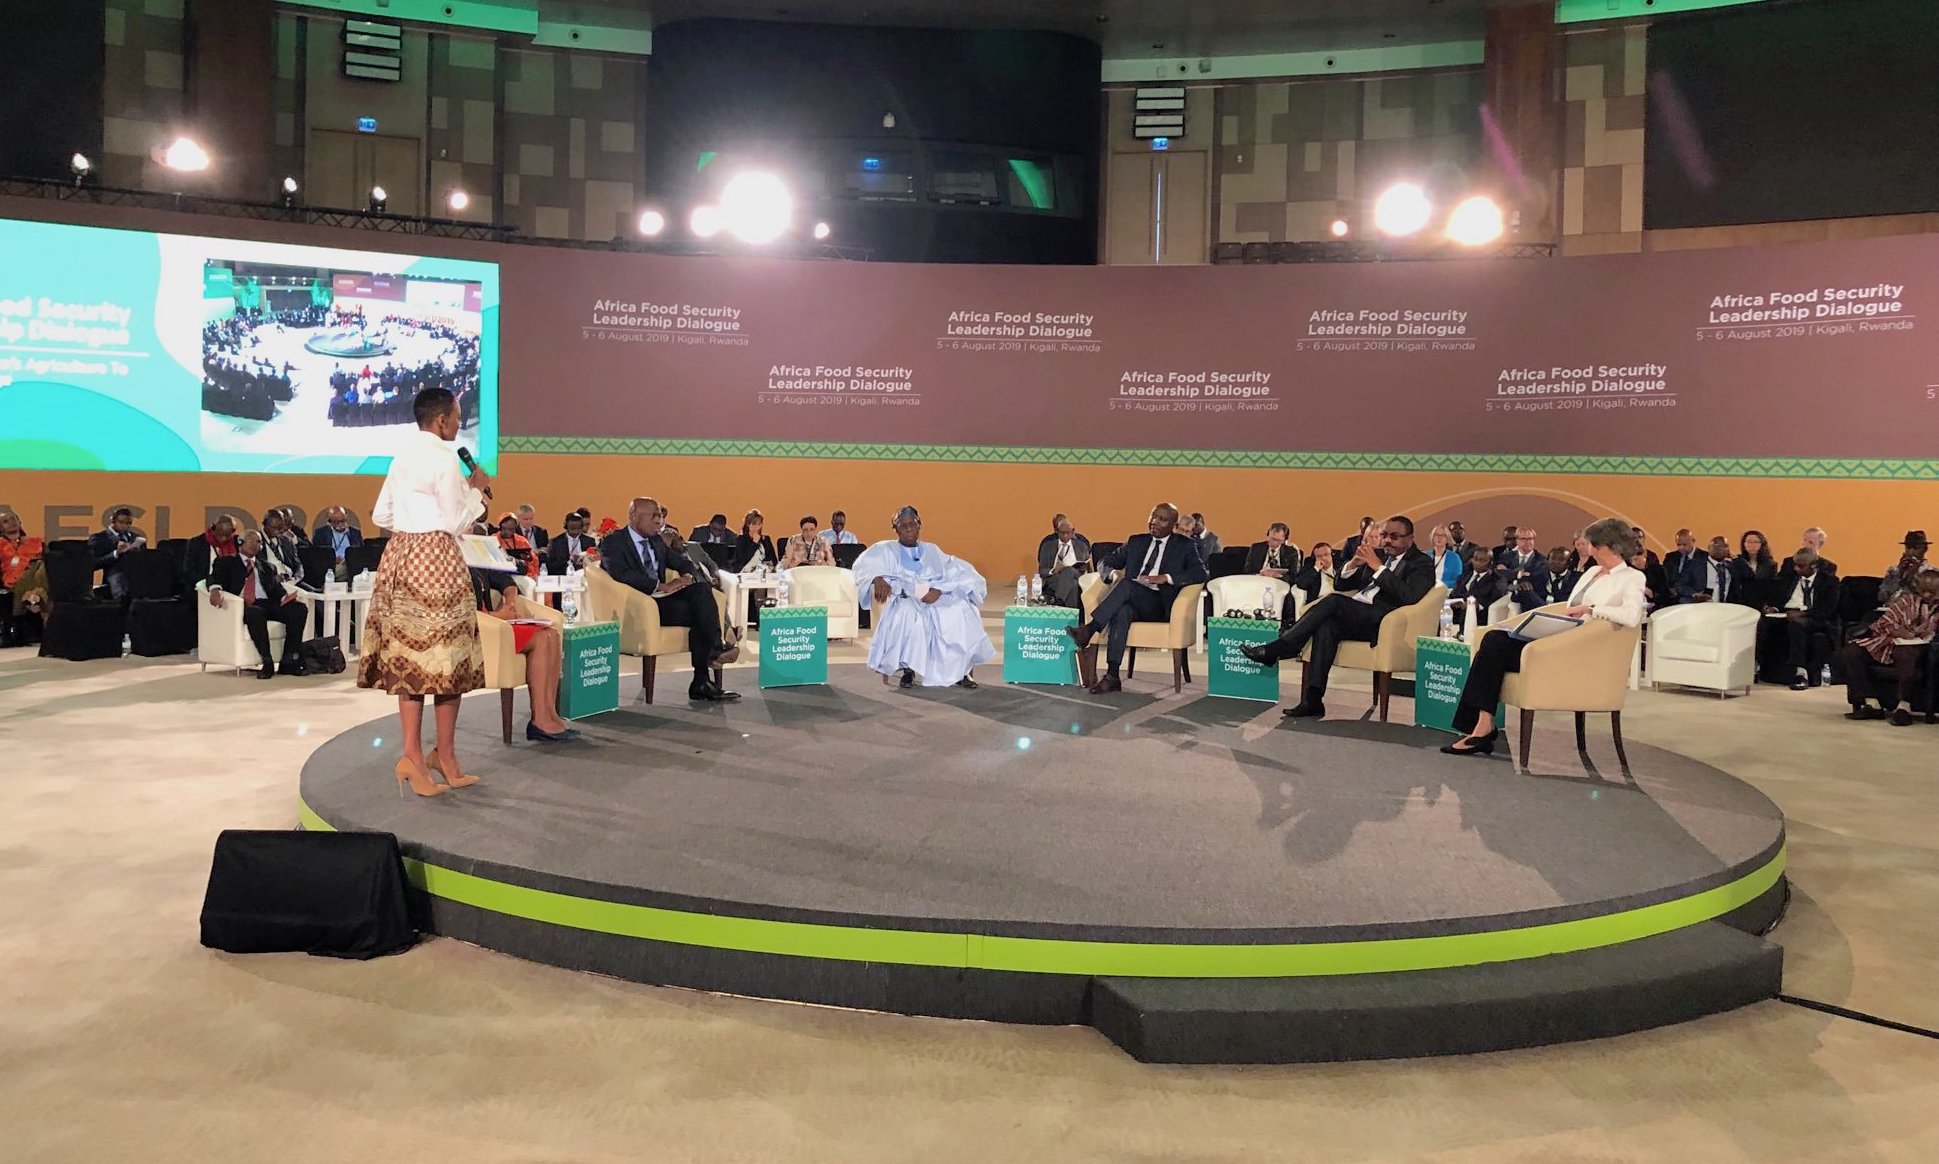 The Prime Minister of Rwanda, Édouard Ngirente, and other leaders discussed regional and national priorities at the Africa Food Security Leadership Dialogue. (Photo: Martin Kropff/CIMMYT)